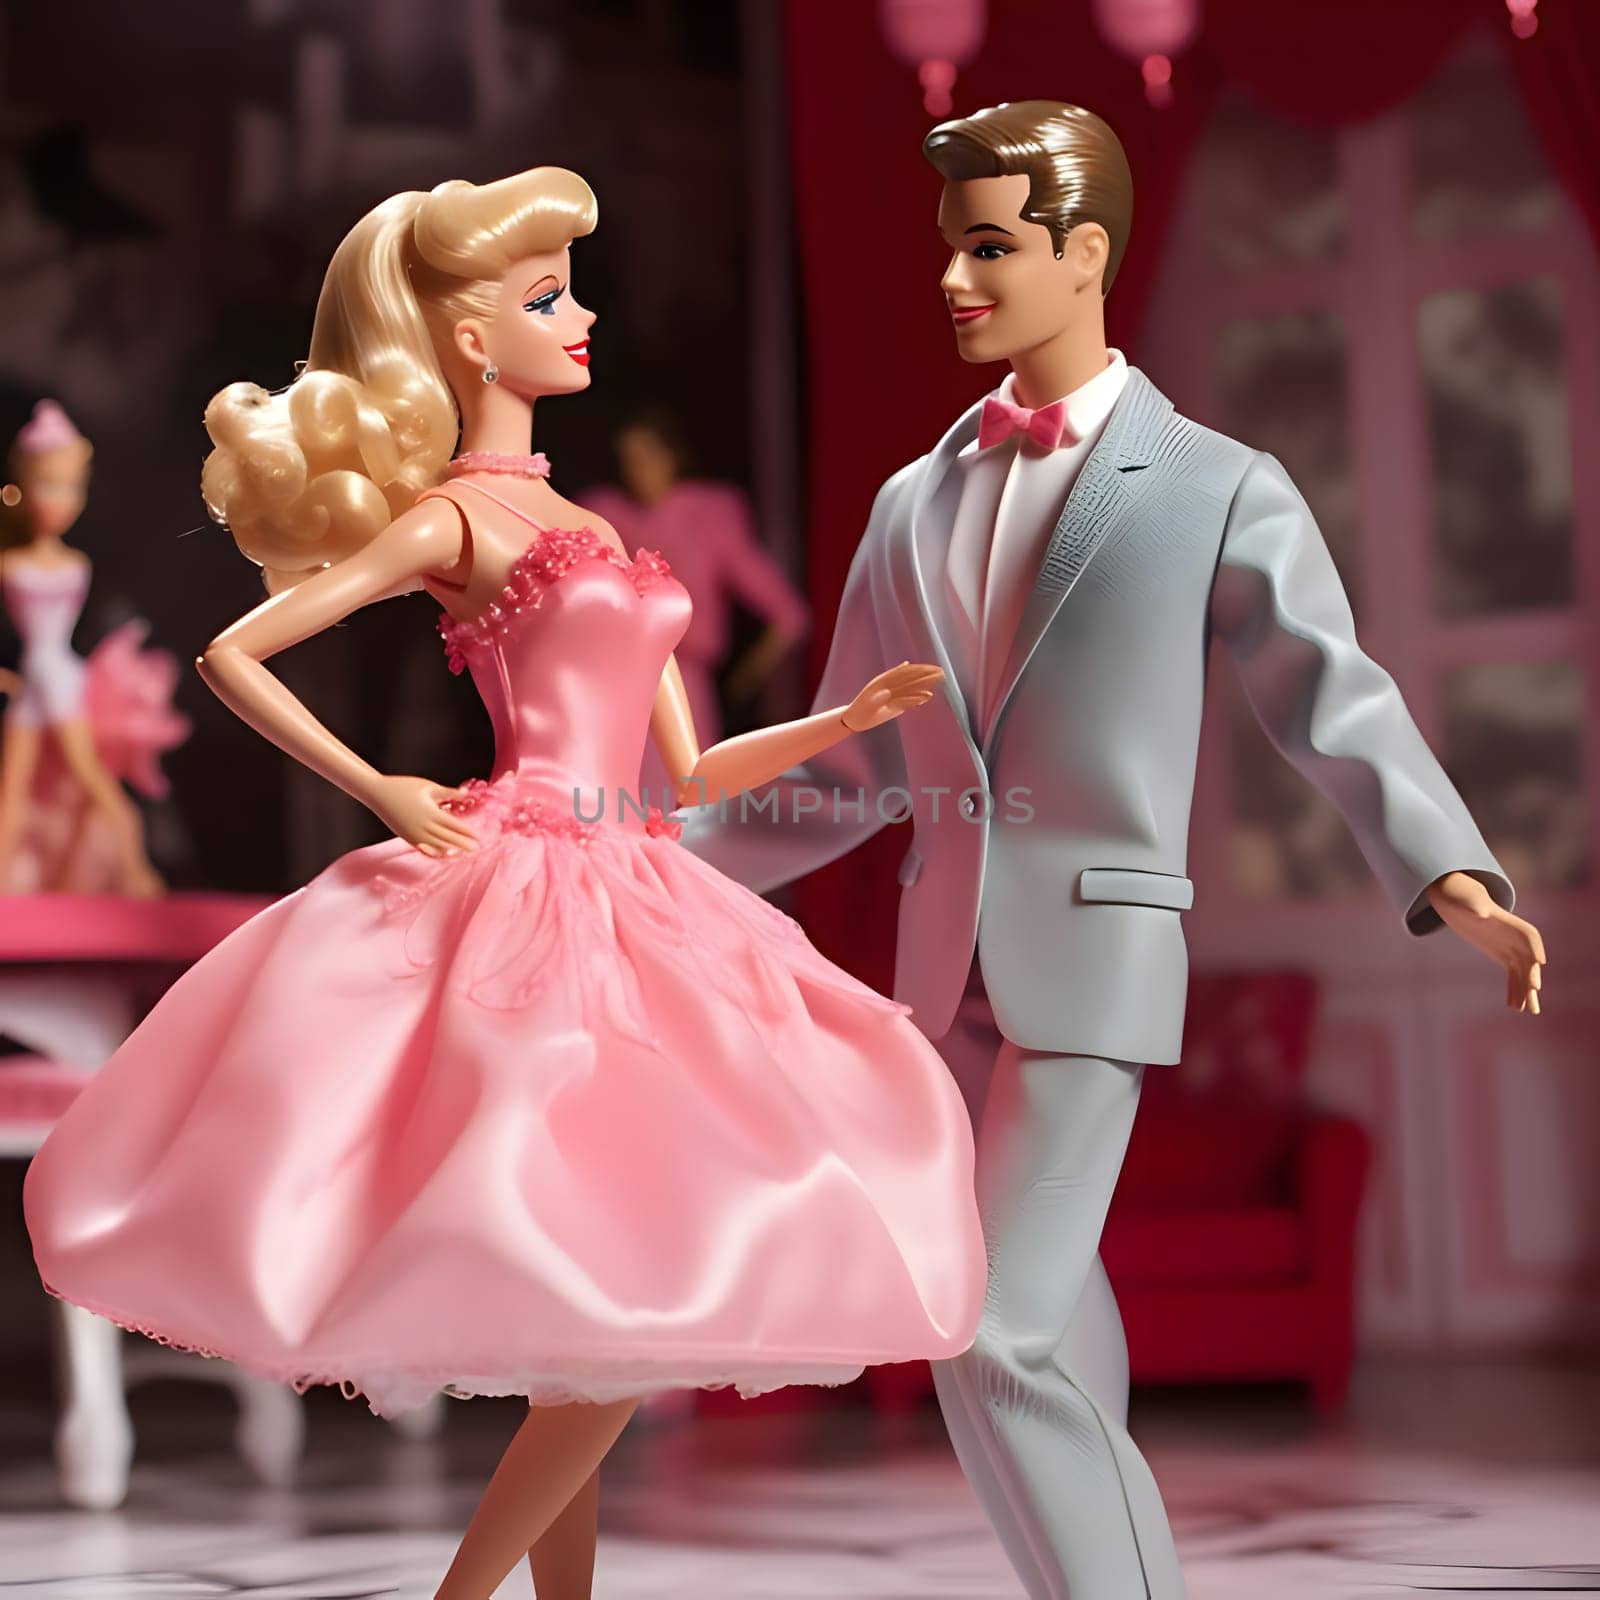 Barbie in a pink dress dances with LGBT Ken in a light-colored suit. by ThemesS